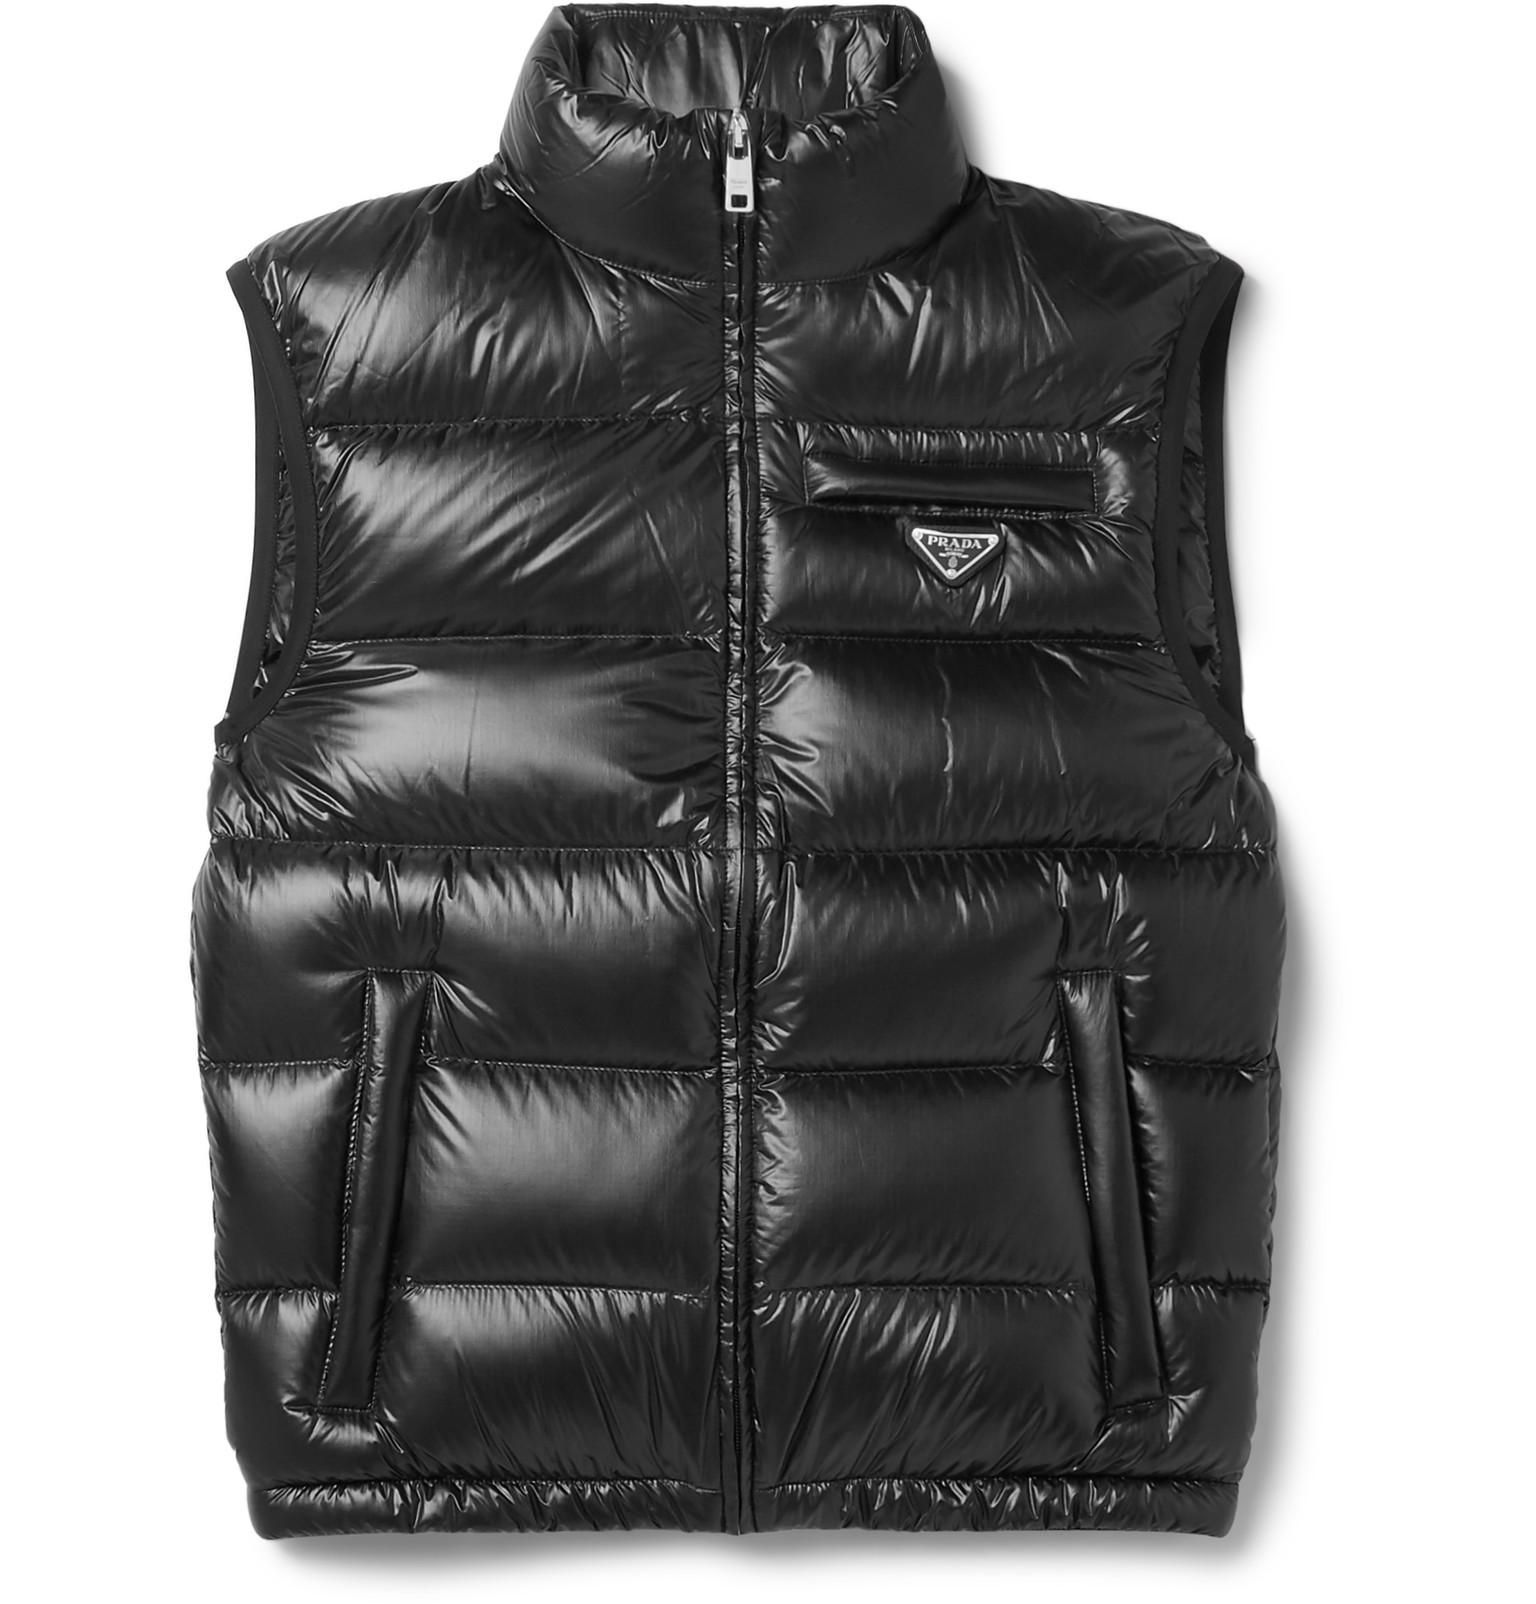 Prada Goose Quilted Ripstop Down Gilet in Black for Men - Lyst